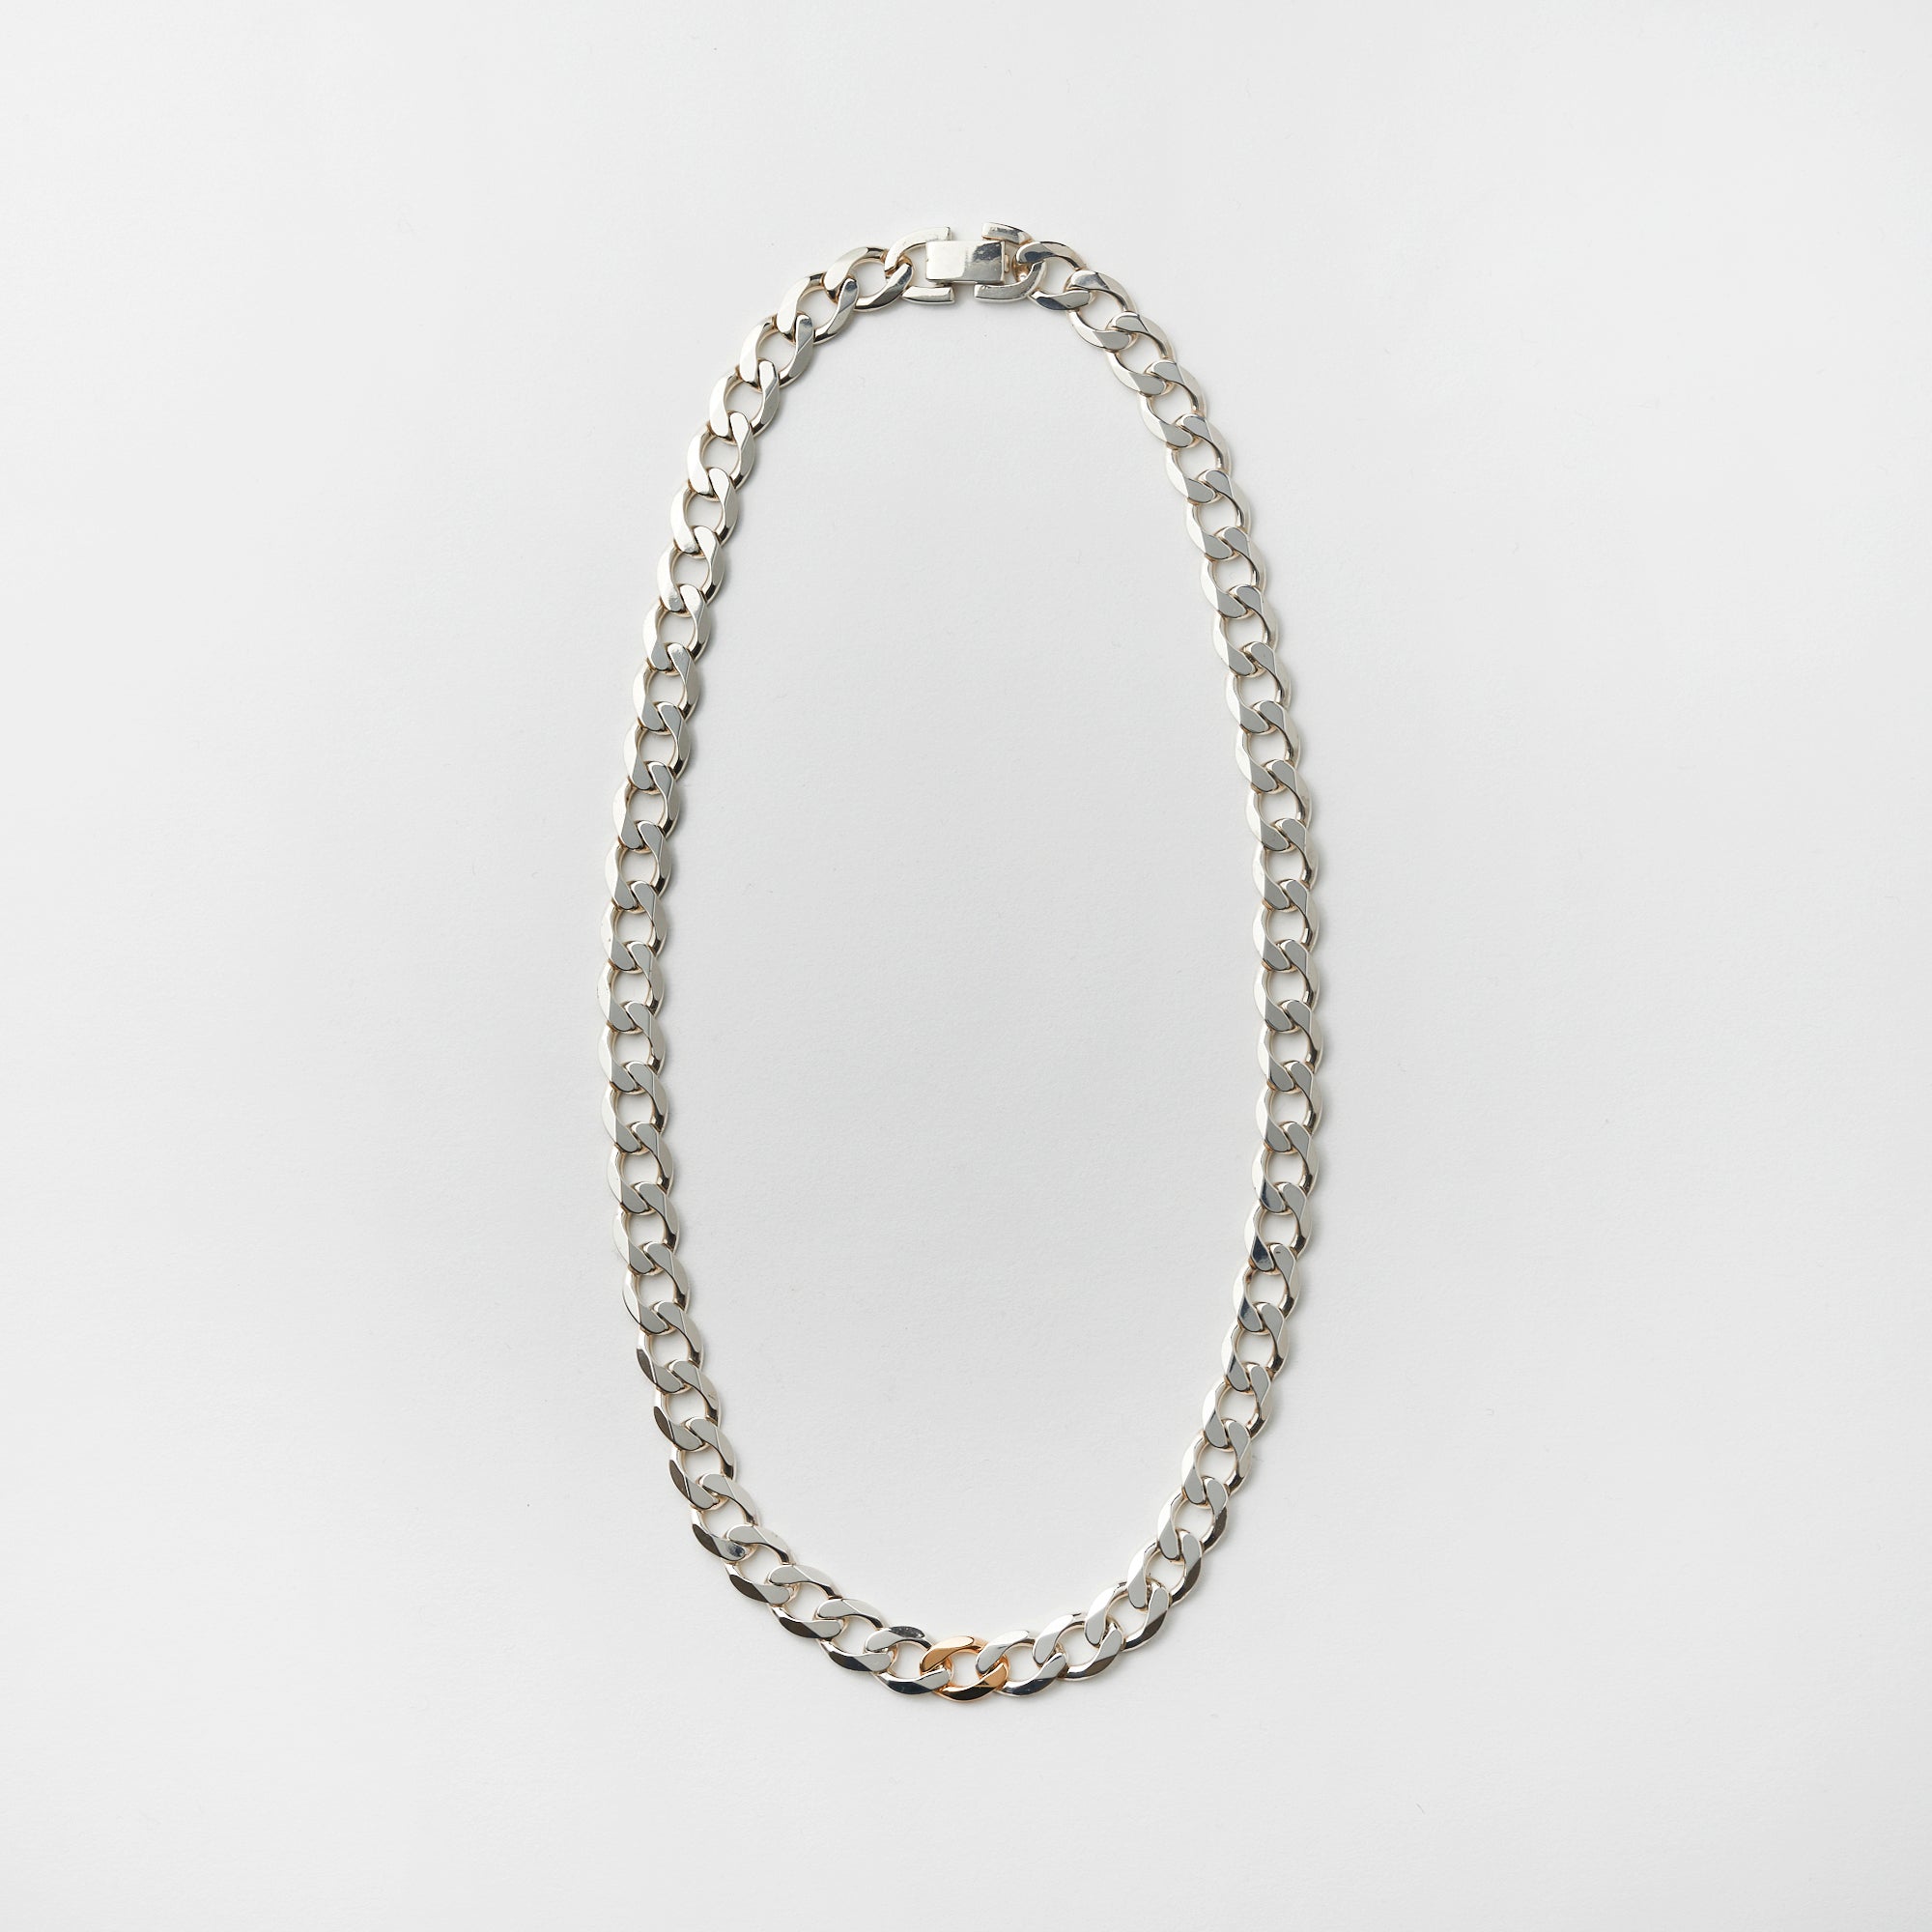 LARGE LIGHT CURB CHAIN NECKLACE